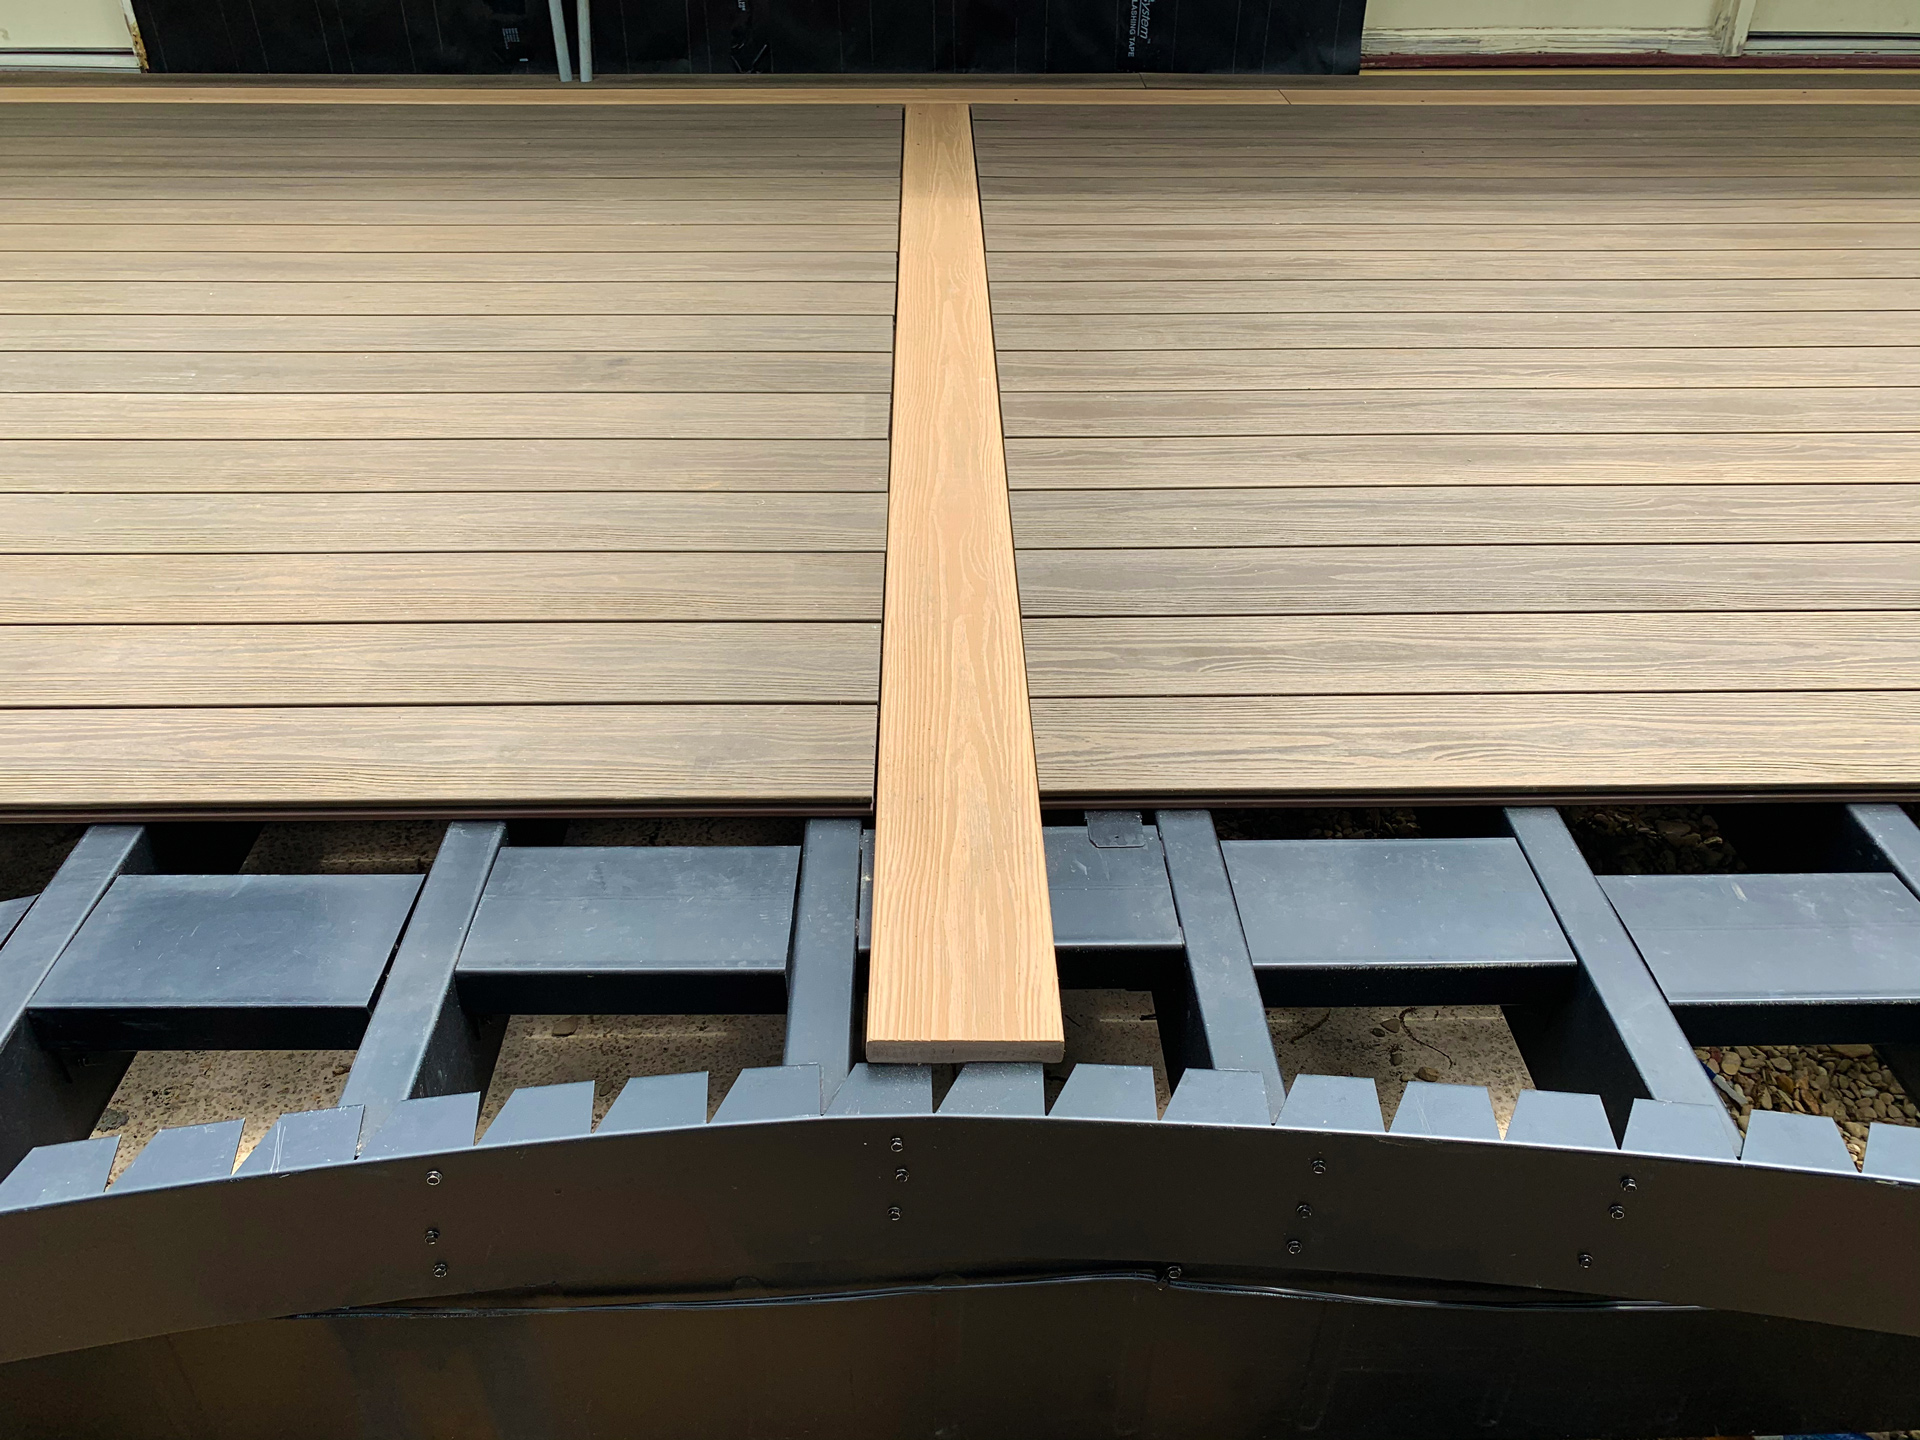 Close up of partially built decking with the steel deck frame showing.